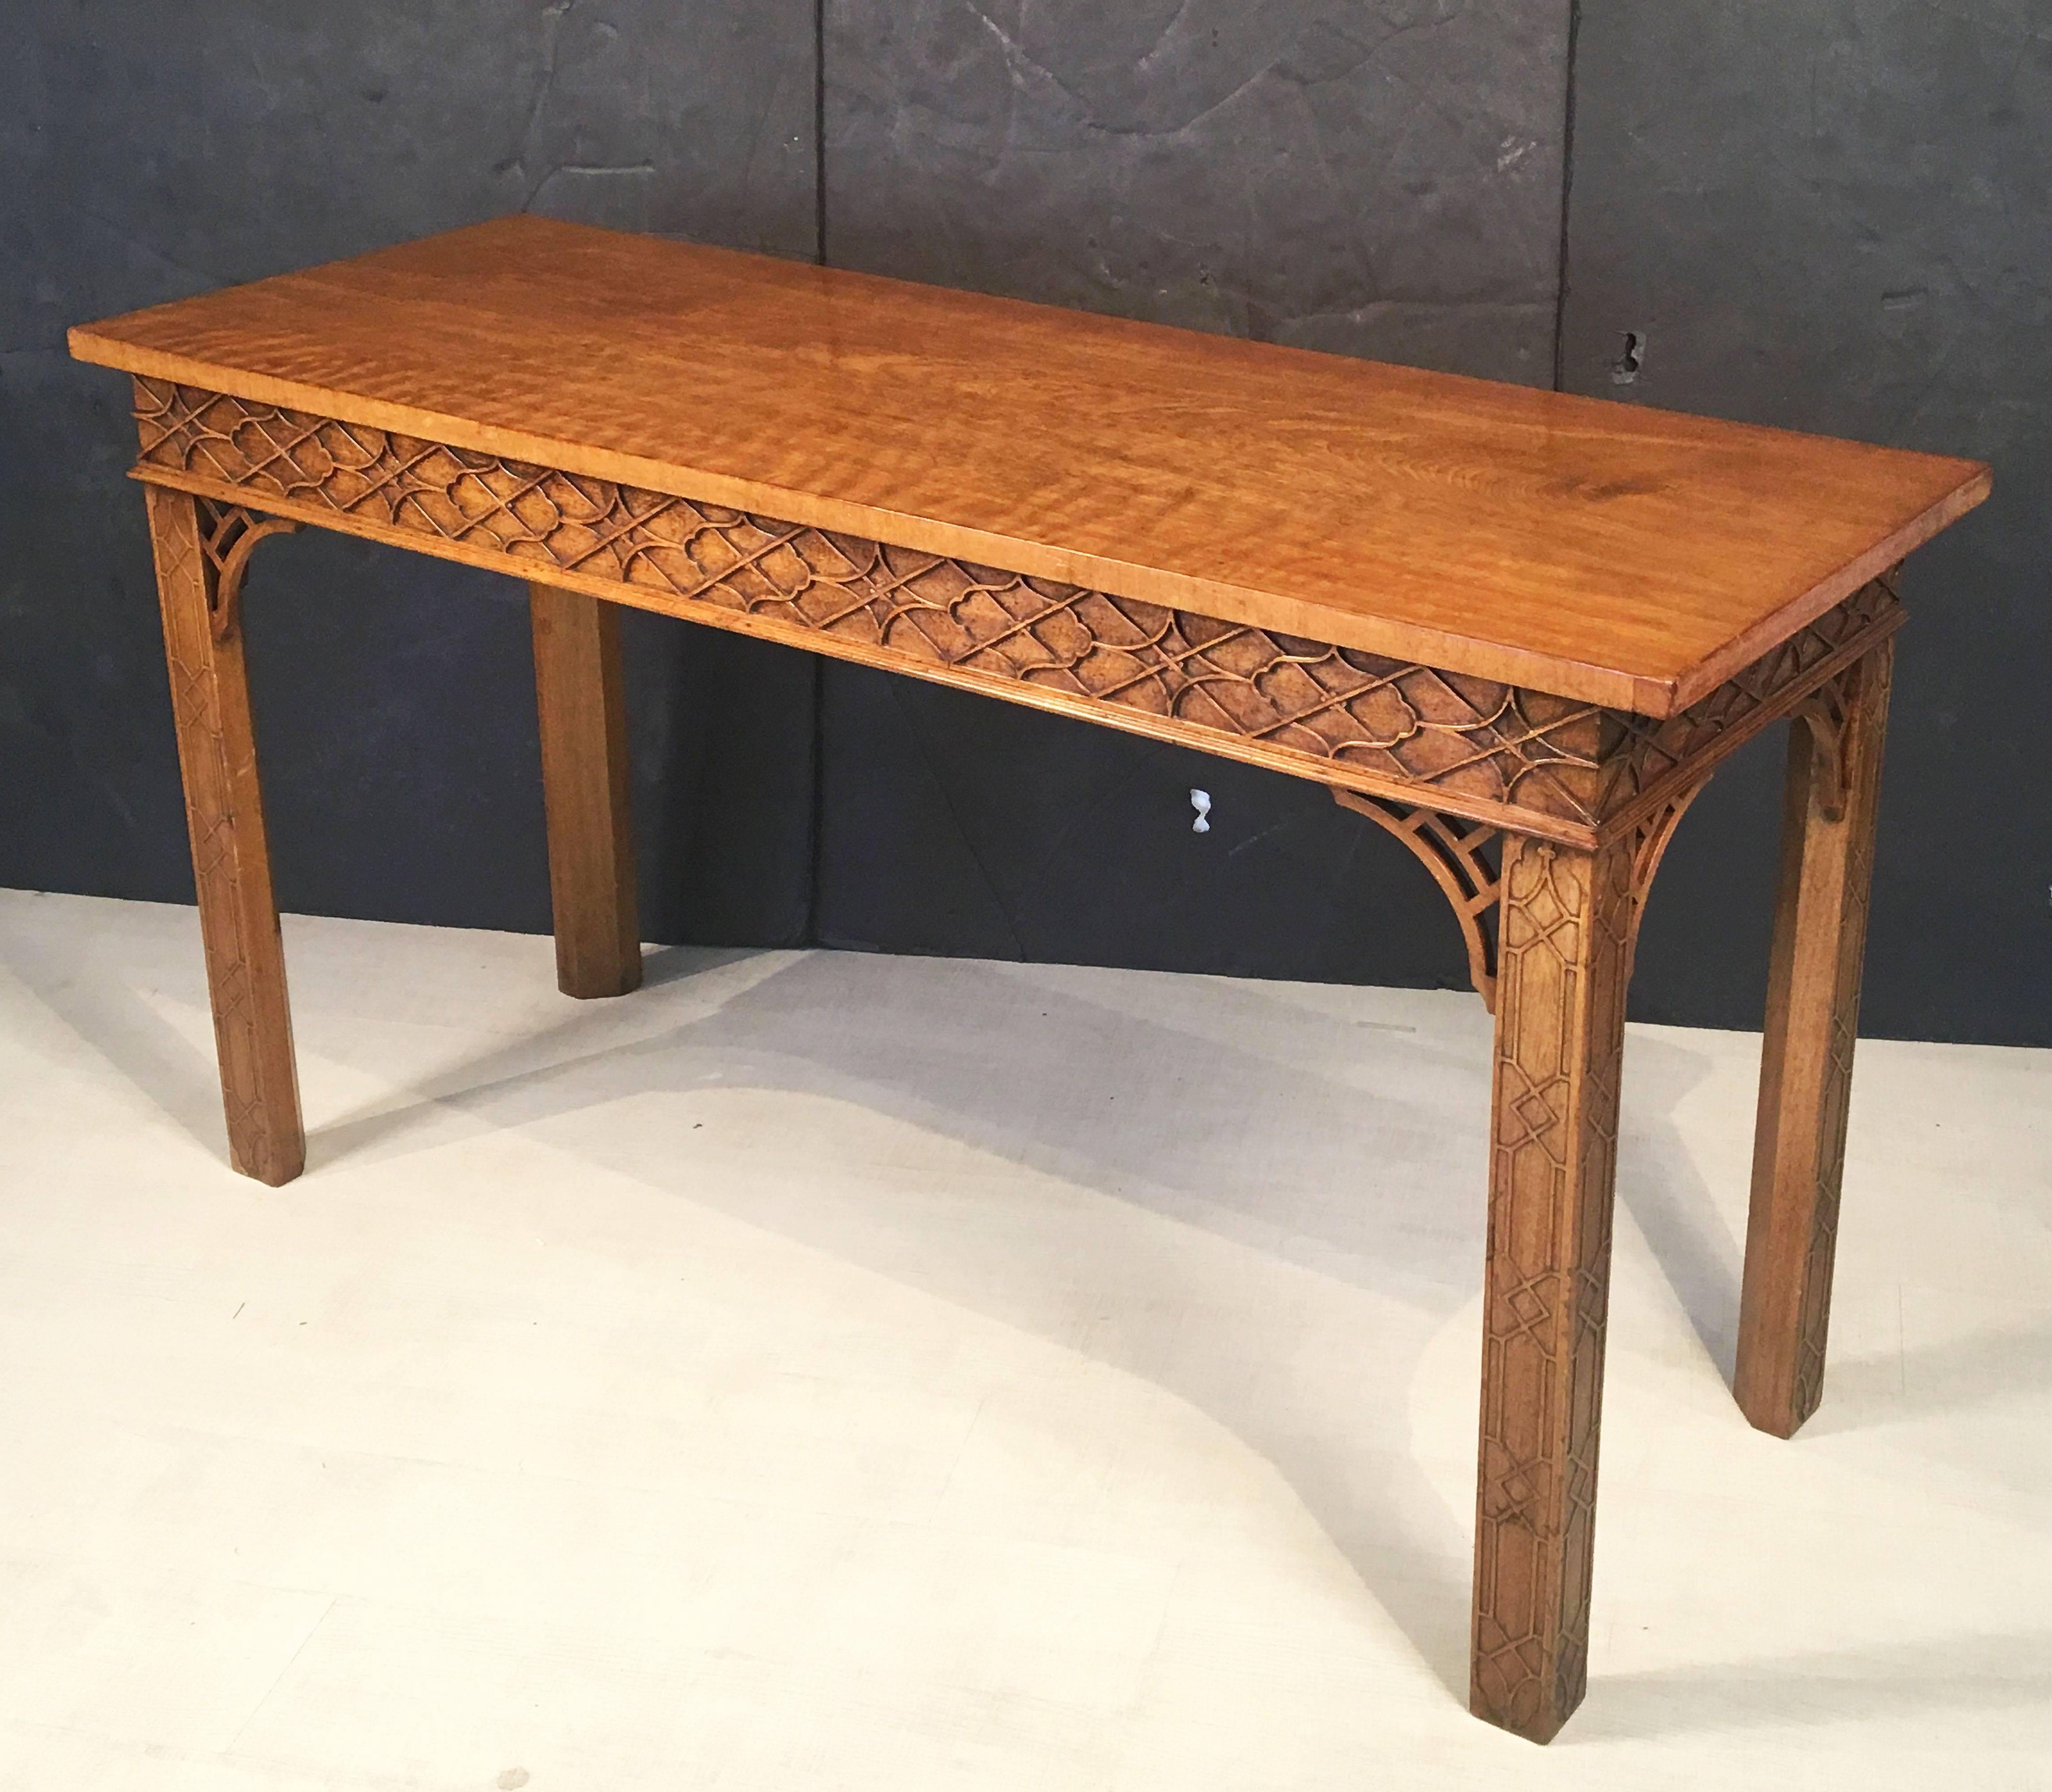 Carved English Walnut Console Table or Server in the Chinese Chippendale Style